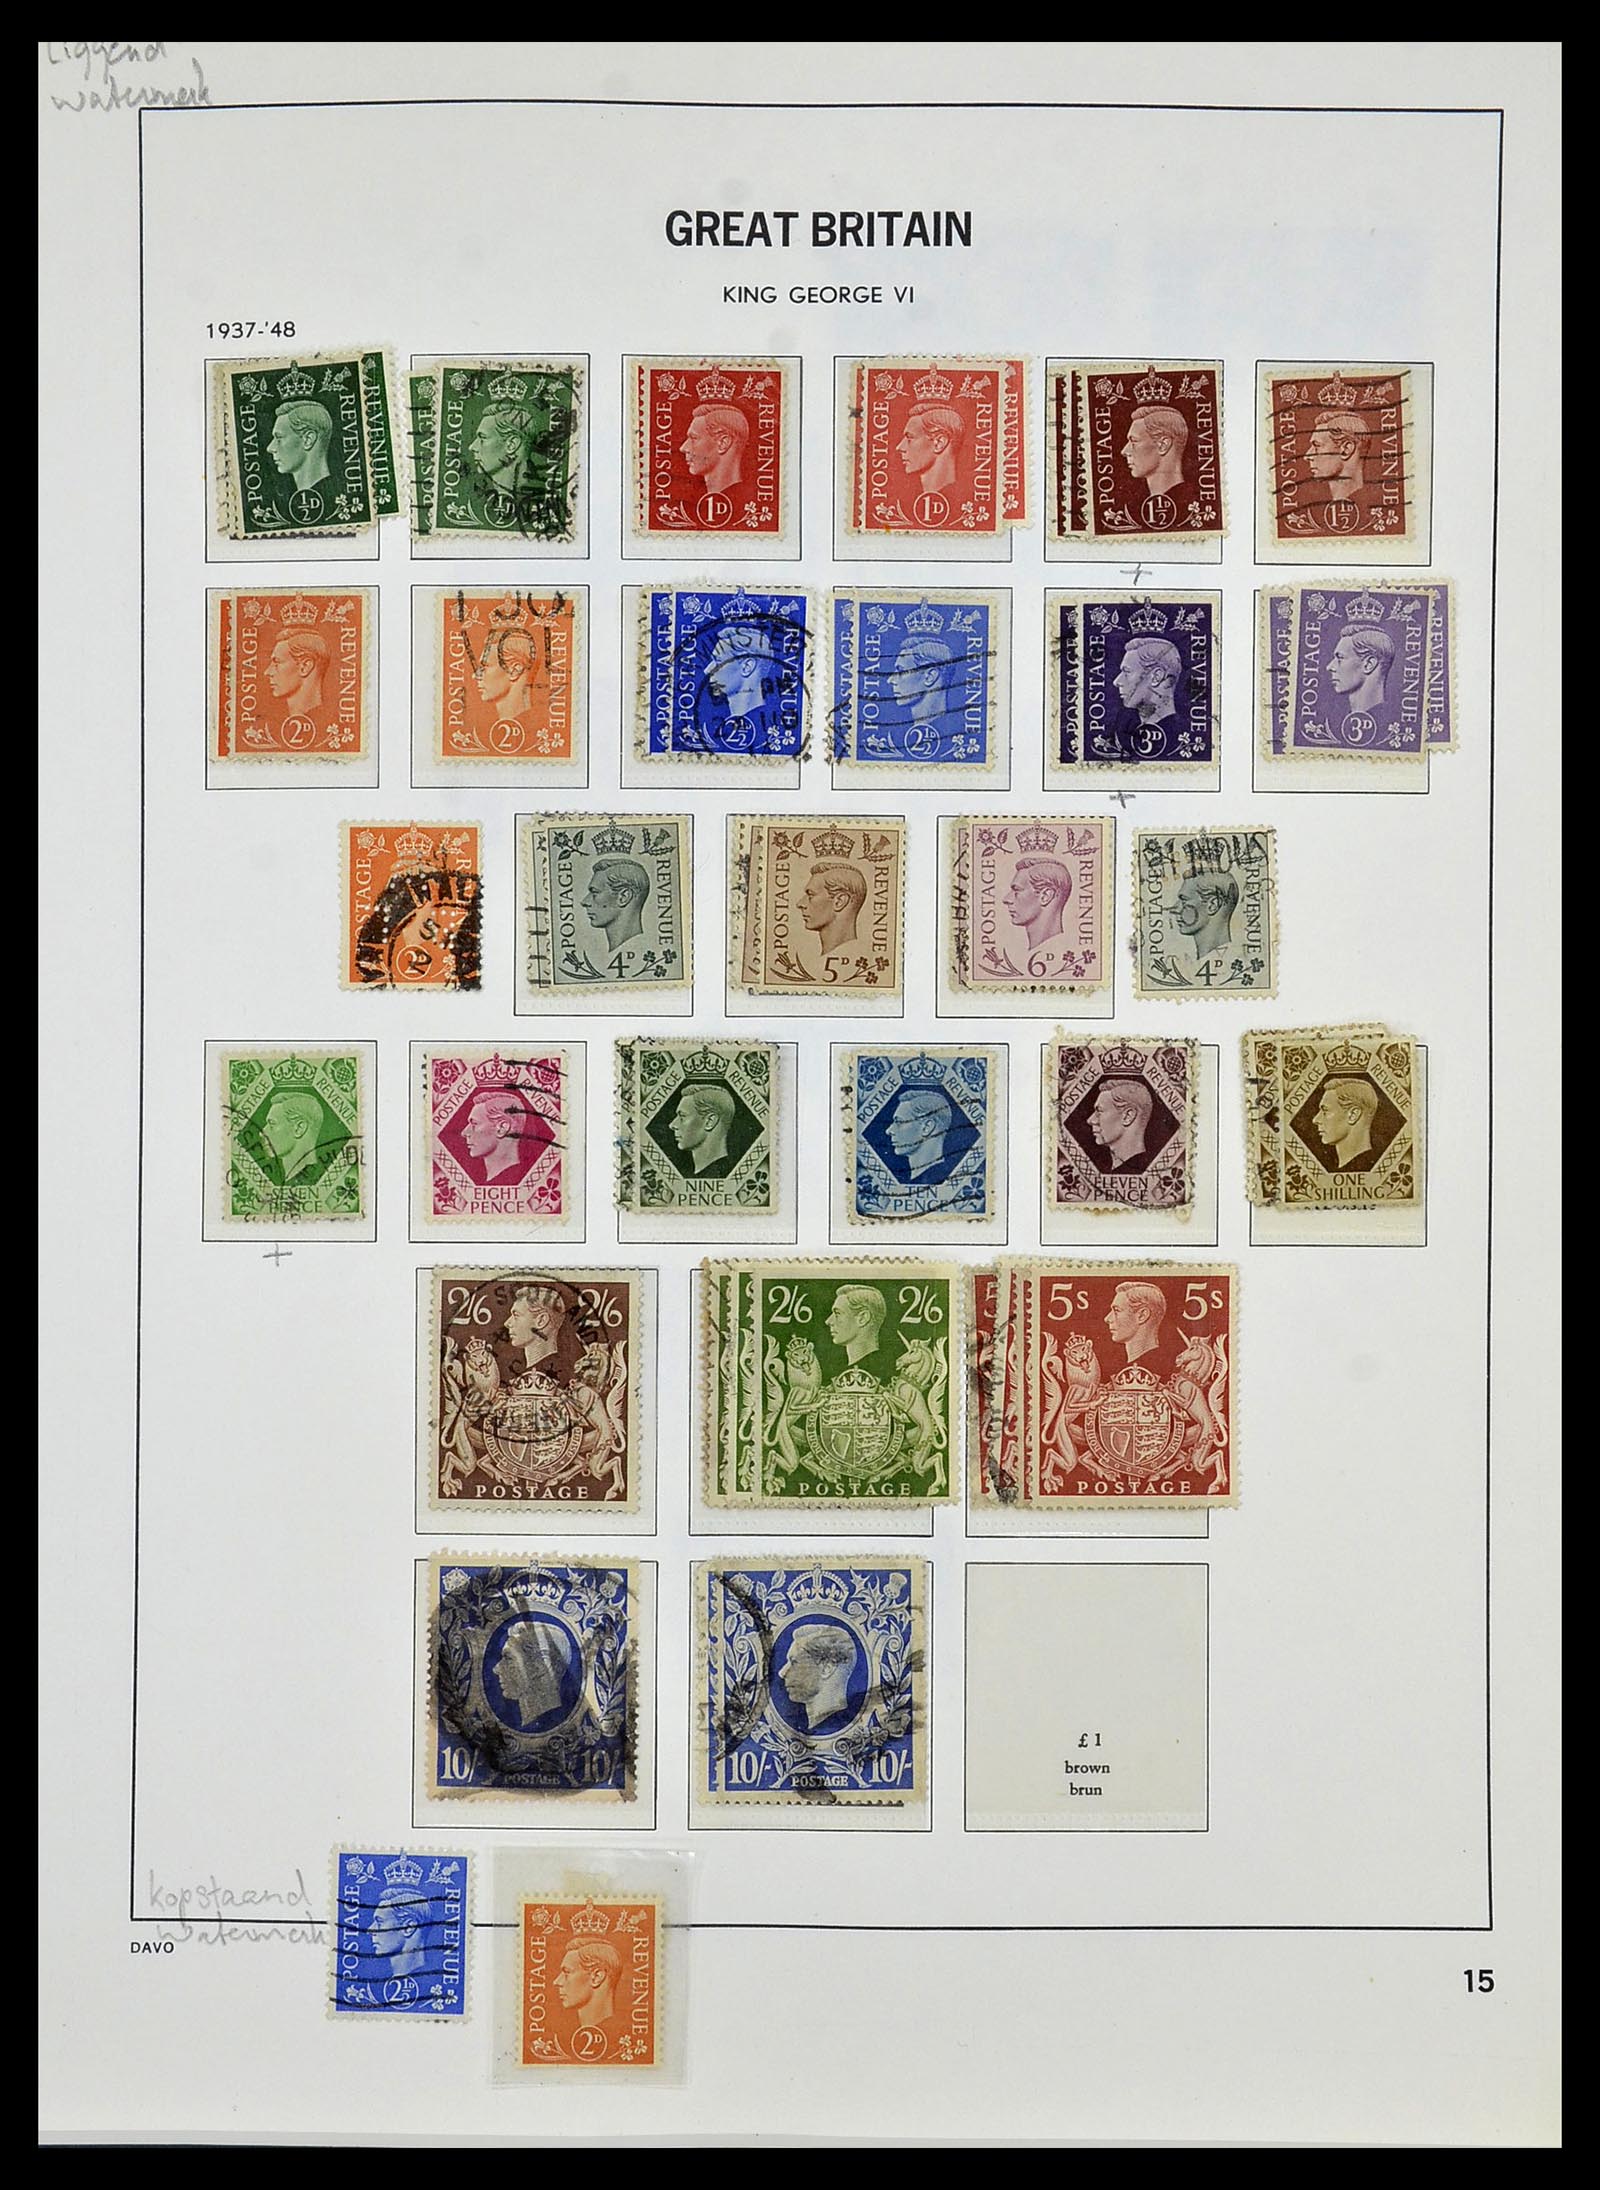 33999 015 - Stamp collection 33999 Great Britain 1841-2000.